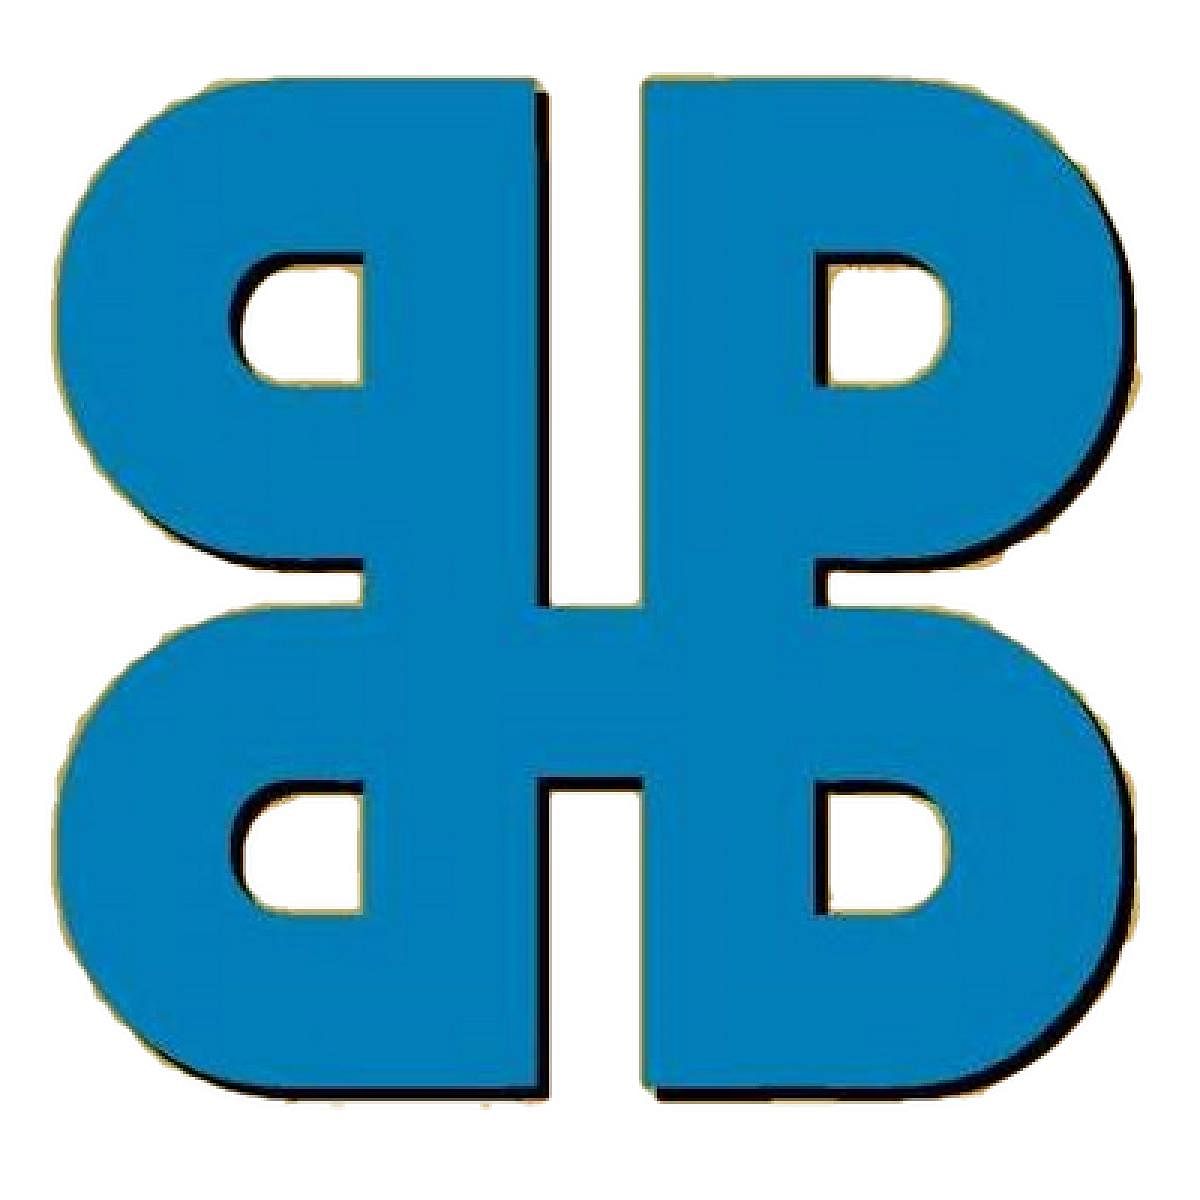 The Logo of Bhushan Power and Steel Ltd. Photo by TWITTER